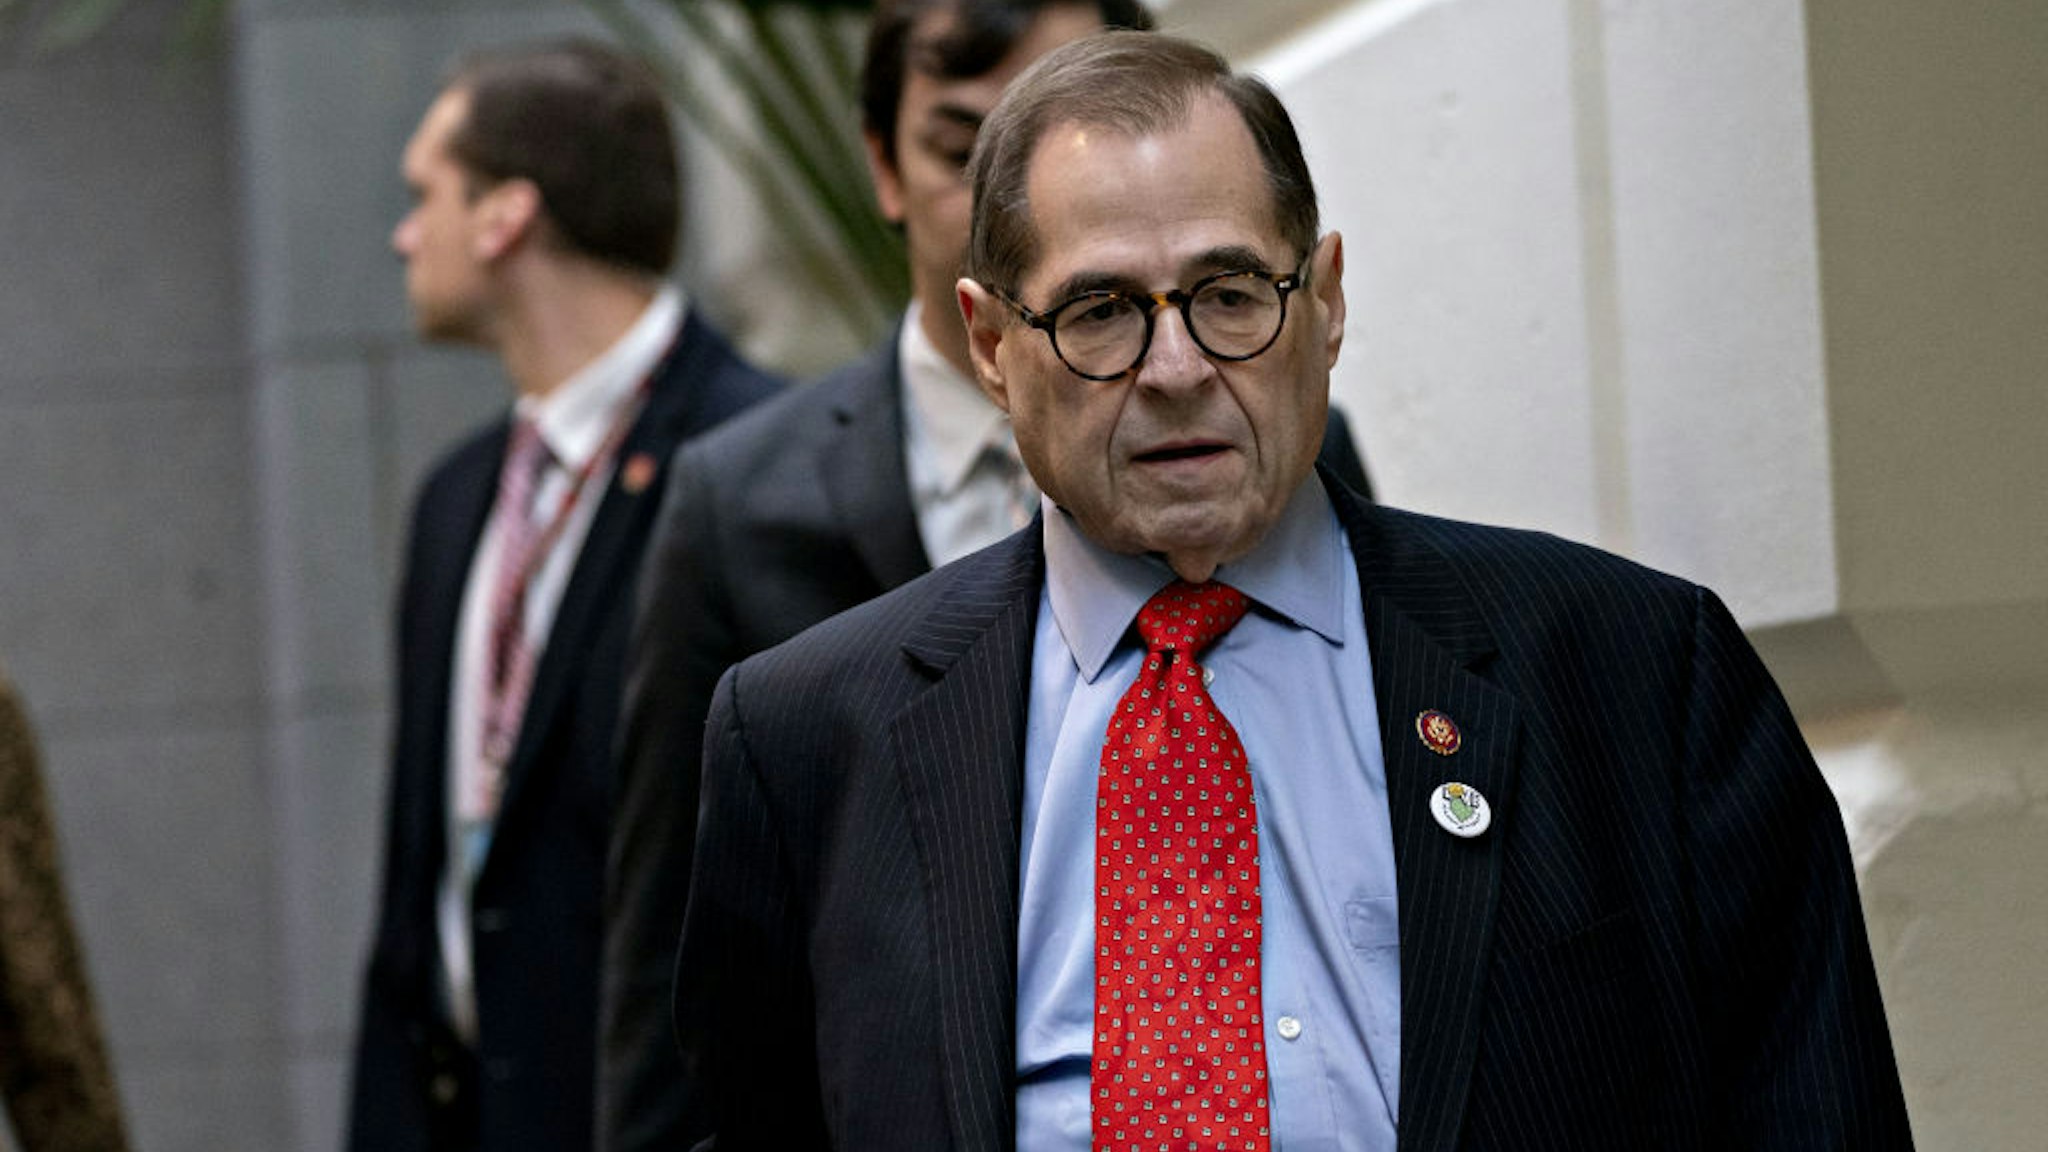 Representative Jerry Nadler, a Democrat from New York, arrives to a weekly Democratic caucus meeting at the U.S. Capitol in Washington, D.C., U.S., on Wednesday, Feb. 5, 2020. President Donald Trump's inevitable acquittal in the Senate's impeachment trial today has some House Democrats fretting that they should have delivered a more complete case to argue for his removal. Photographer: Andrew Harrer/Bloomberg via Getty Images